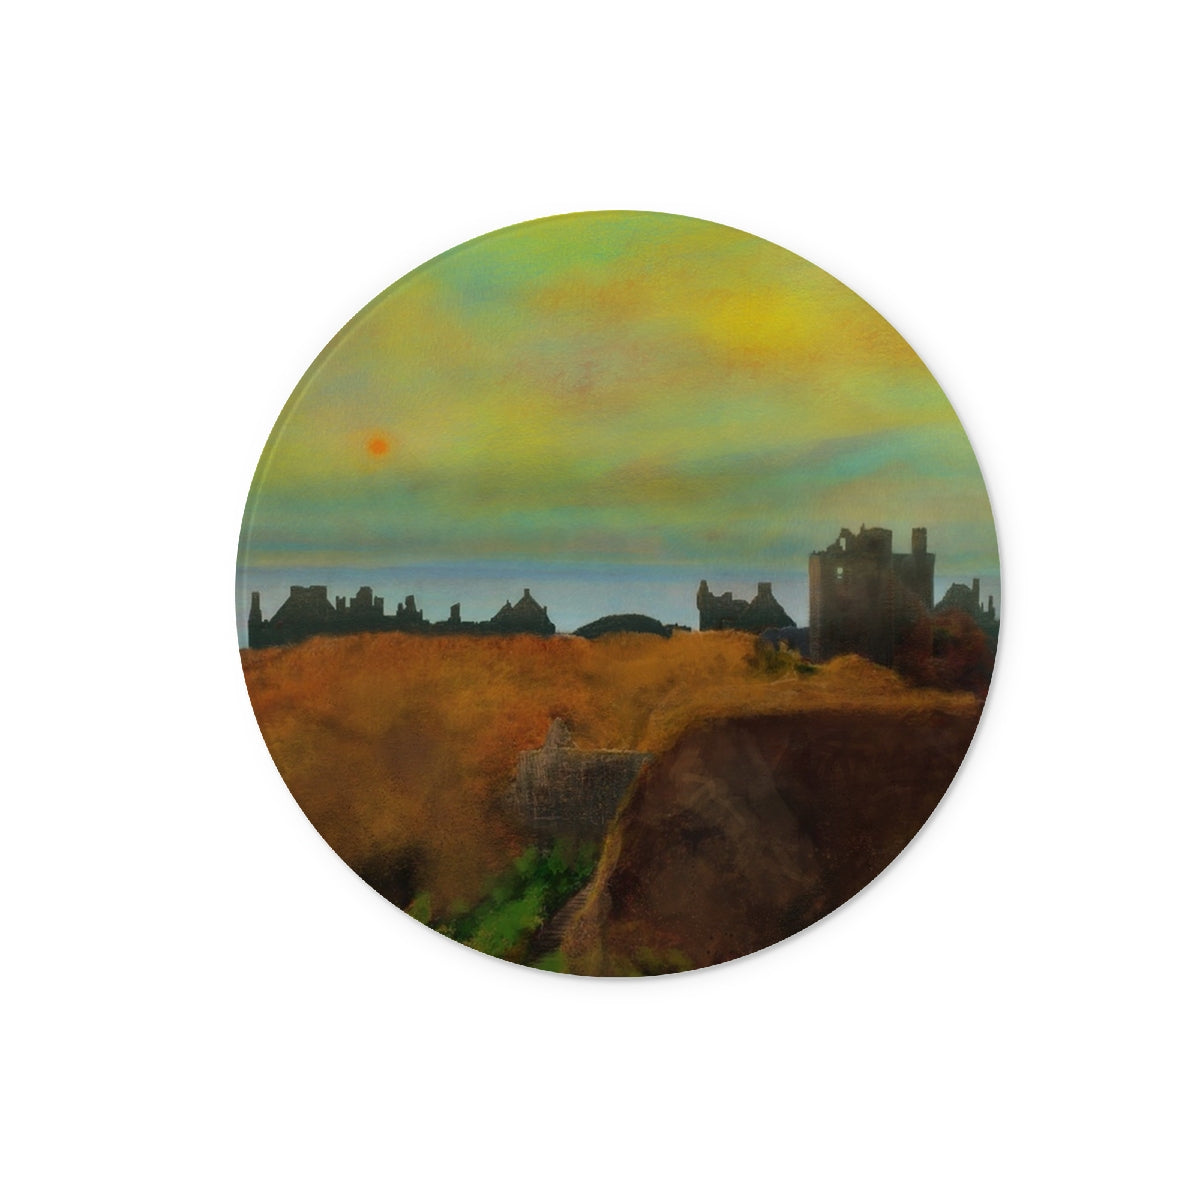 Dunnottar Castle Art Gifts Glass Chopping Board-Glass Chopping Boards-Historic & Iconic Scotland Art Gallery-12" Round-Paintings, Prints, Homeware, Art Gifts From Scotland By Scottish Artist Kevin Hunter